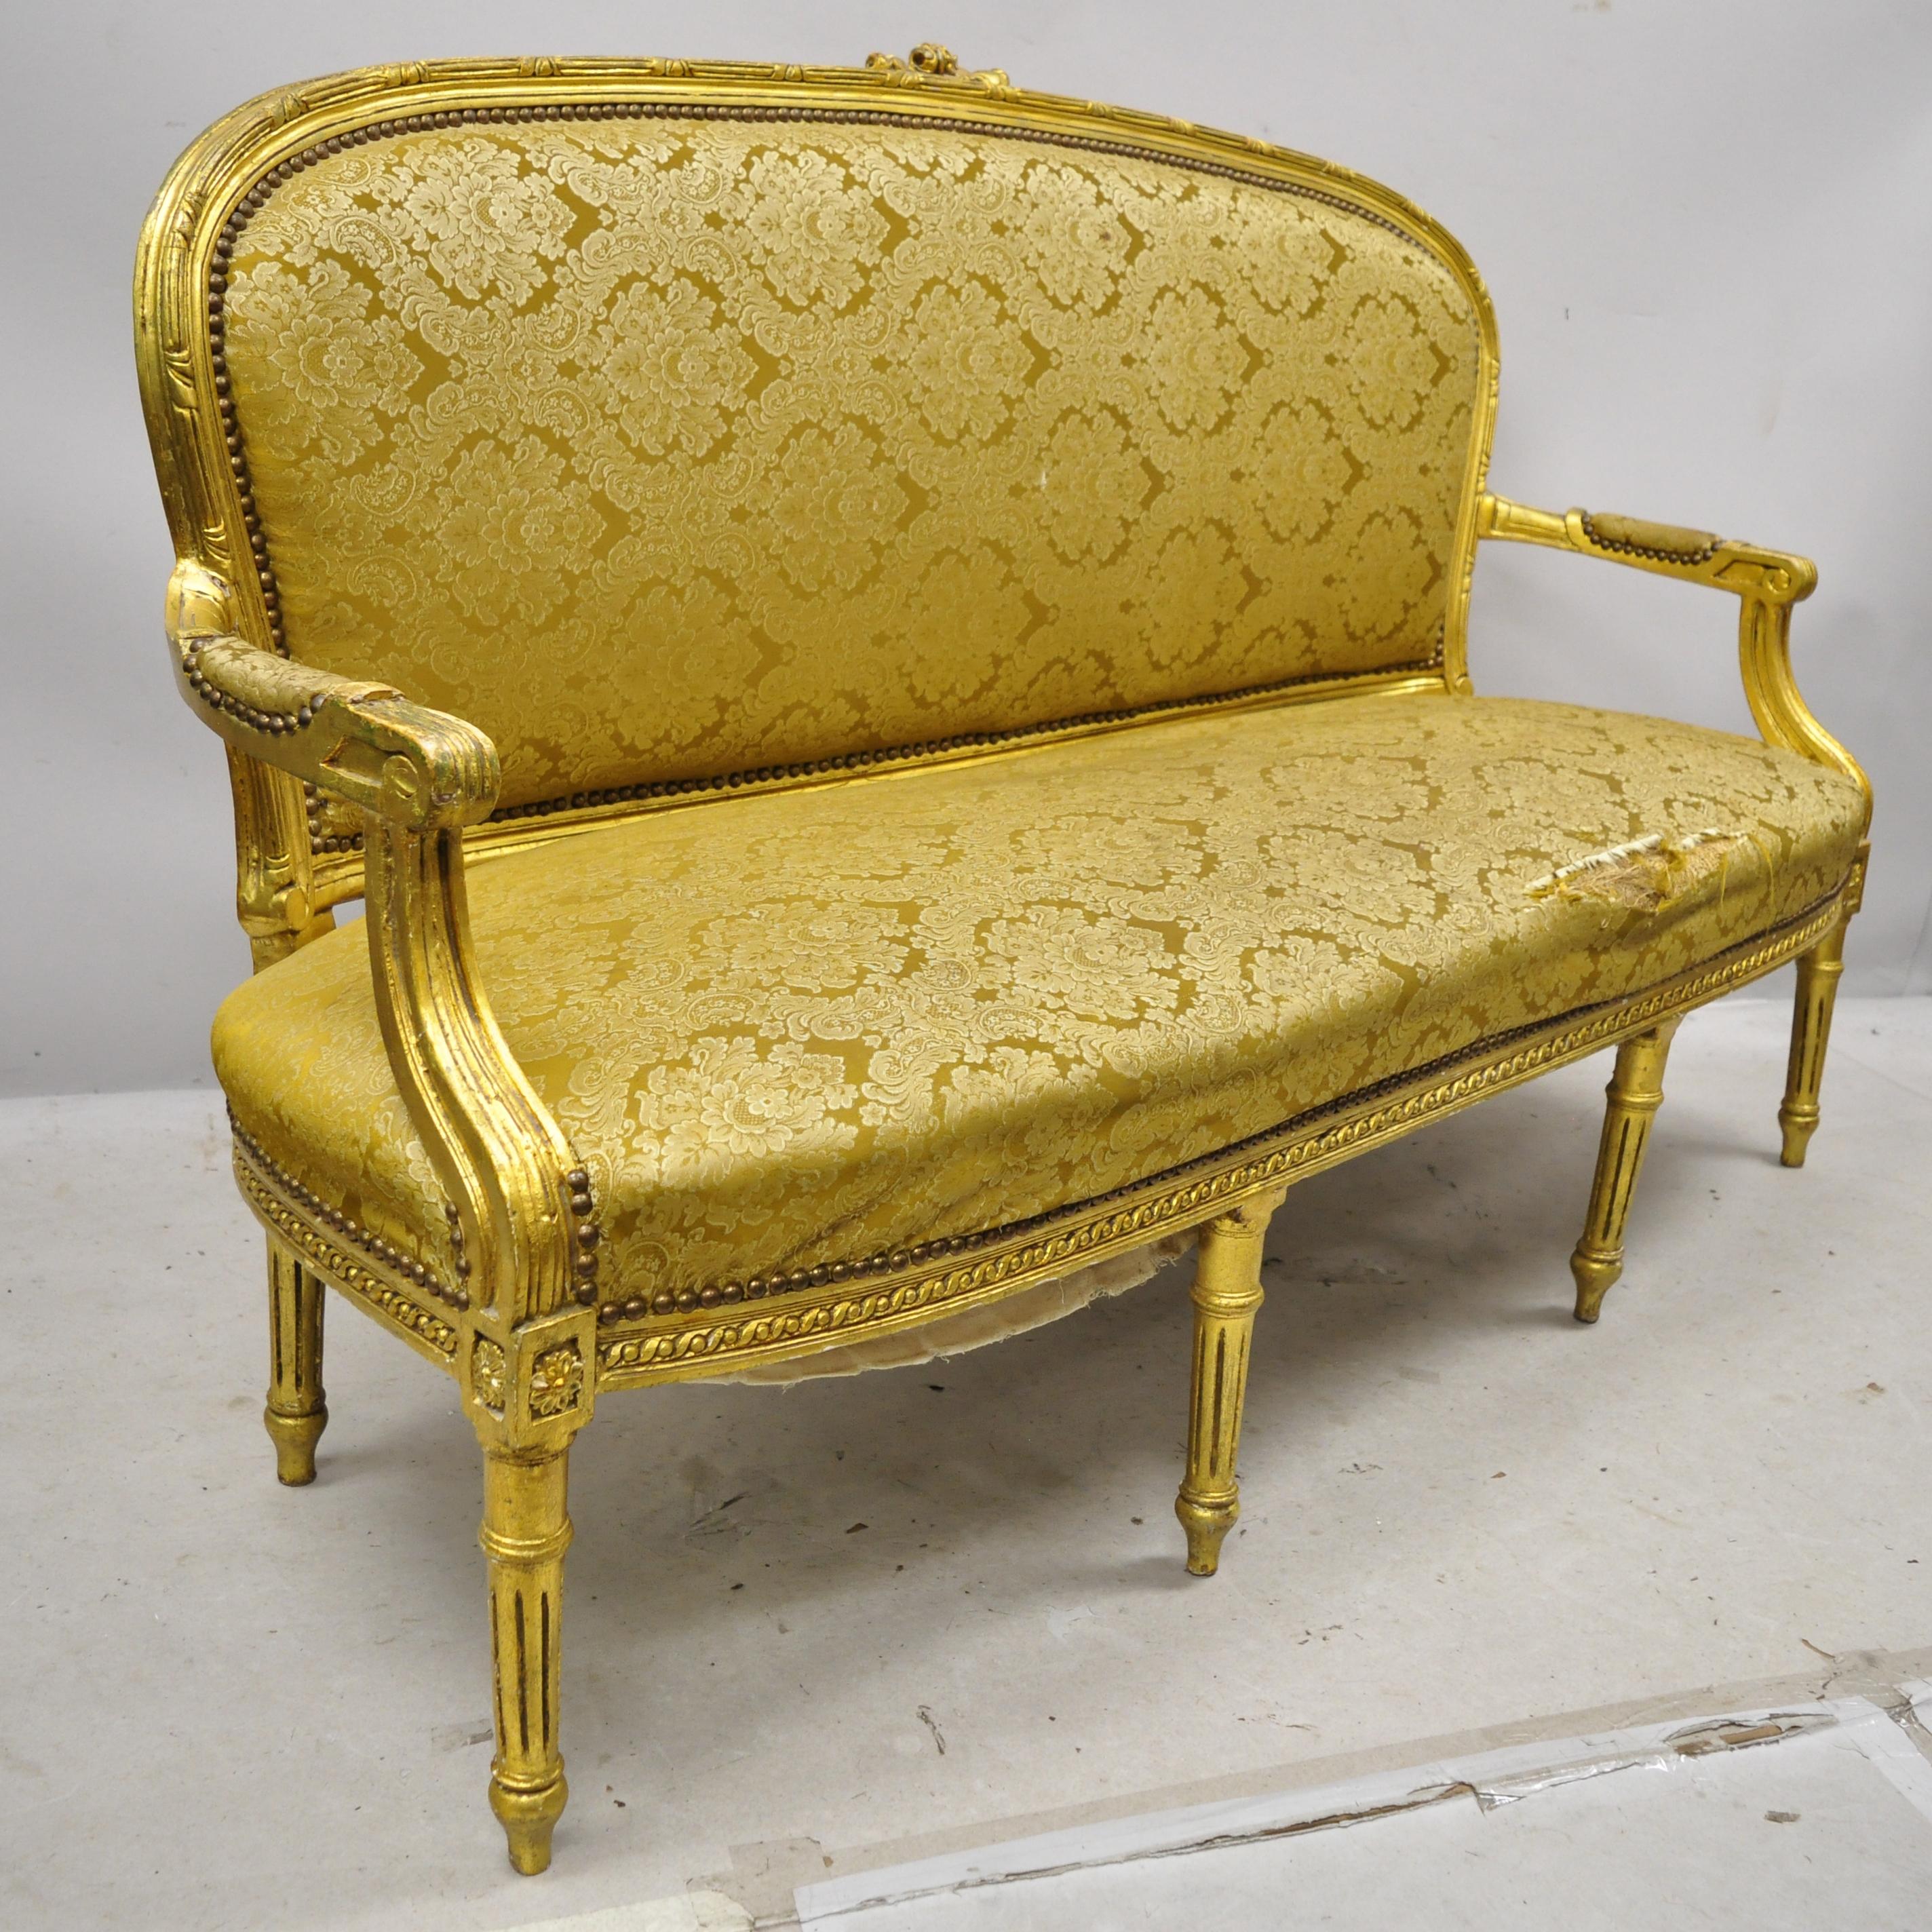 Vintage French Louis XVI style gold leaf 6 leg settee loveseat sofa. Item features distressed gold gilt/gold leaf finish, solid wood frame, nicely carved details, 6 cabriole legs, great style and form, circa mid-late 20th century. Measurements: 38